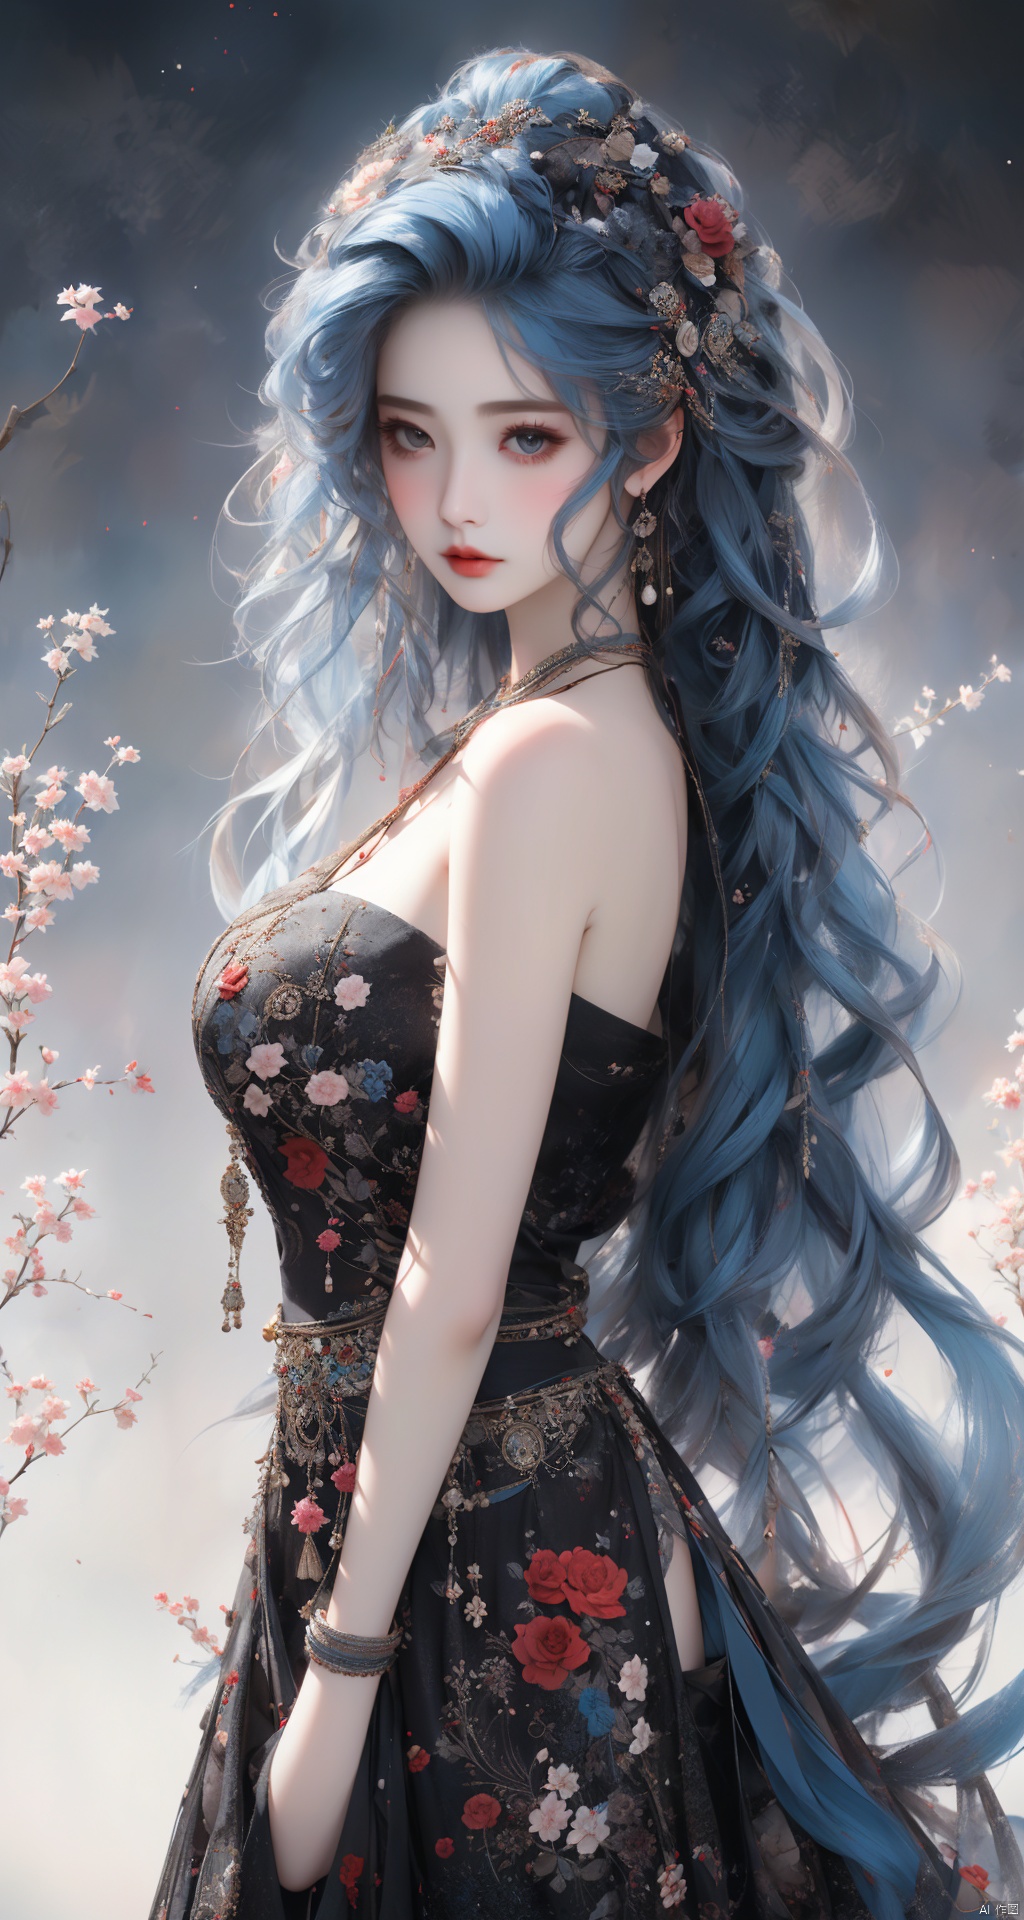 An intricate portrayal of a captivating girl with flowing blue hair gently framing her face, adding an aura of mystery and allure. Her uniform is detailed in 8k resolution, capturing every nuance of the fabric and design under the magical play of cinematic lighting and lens flares, creating a visual feast for the eyes.